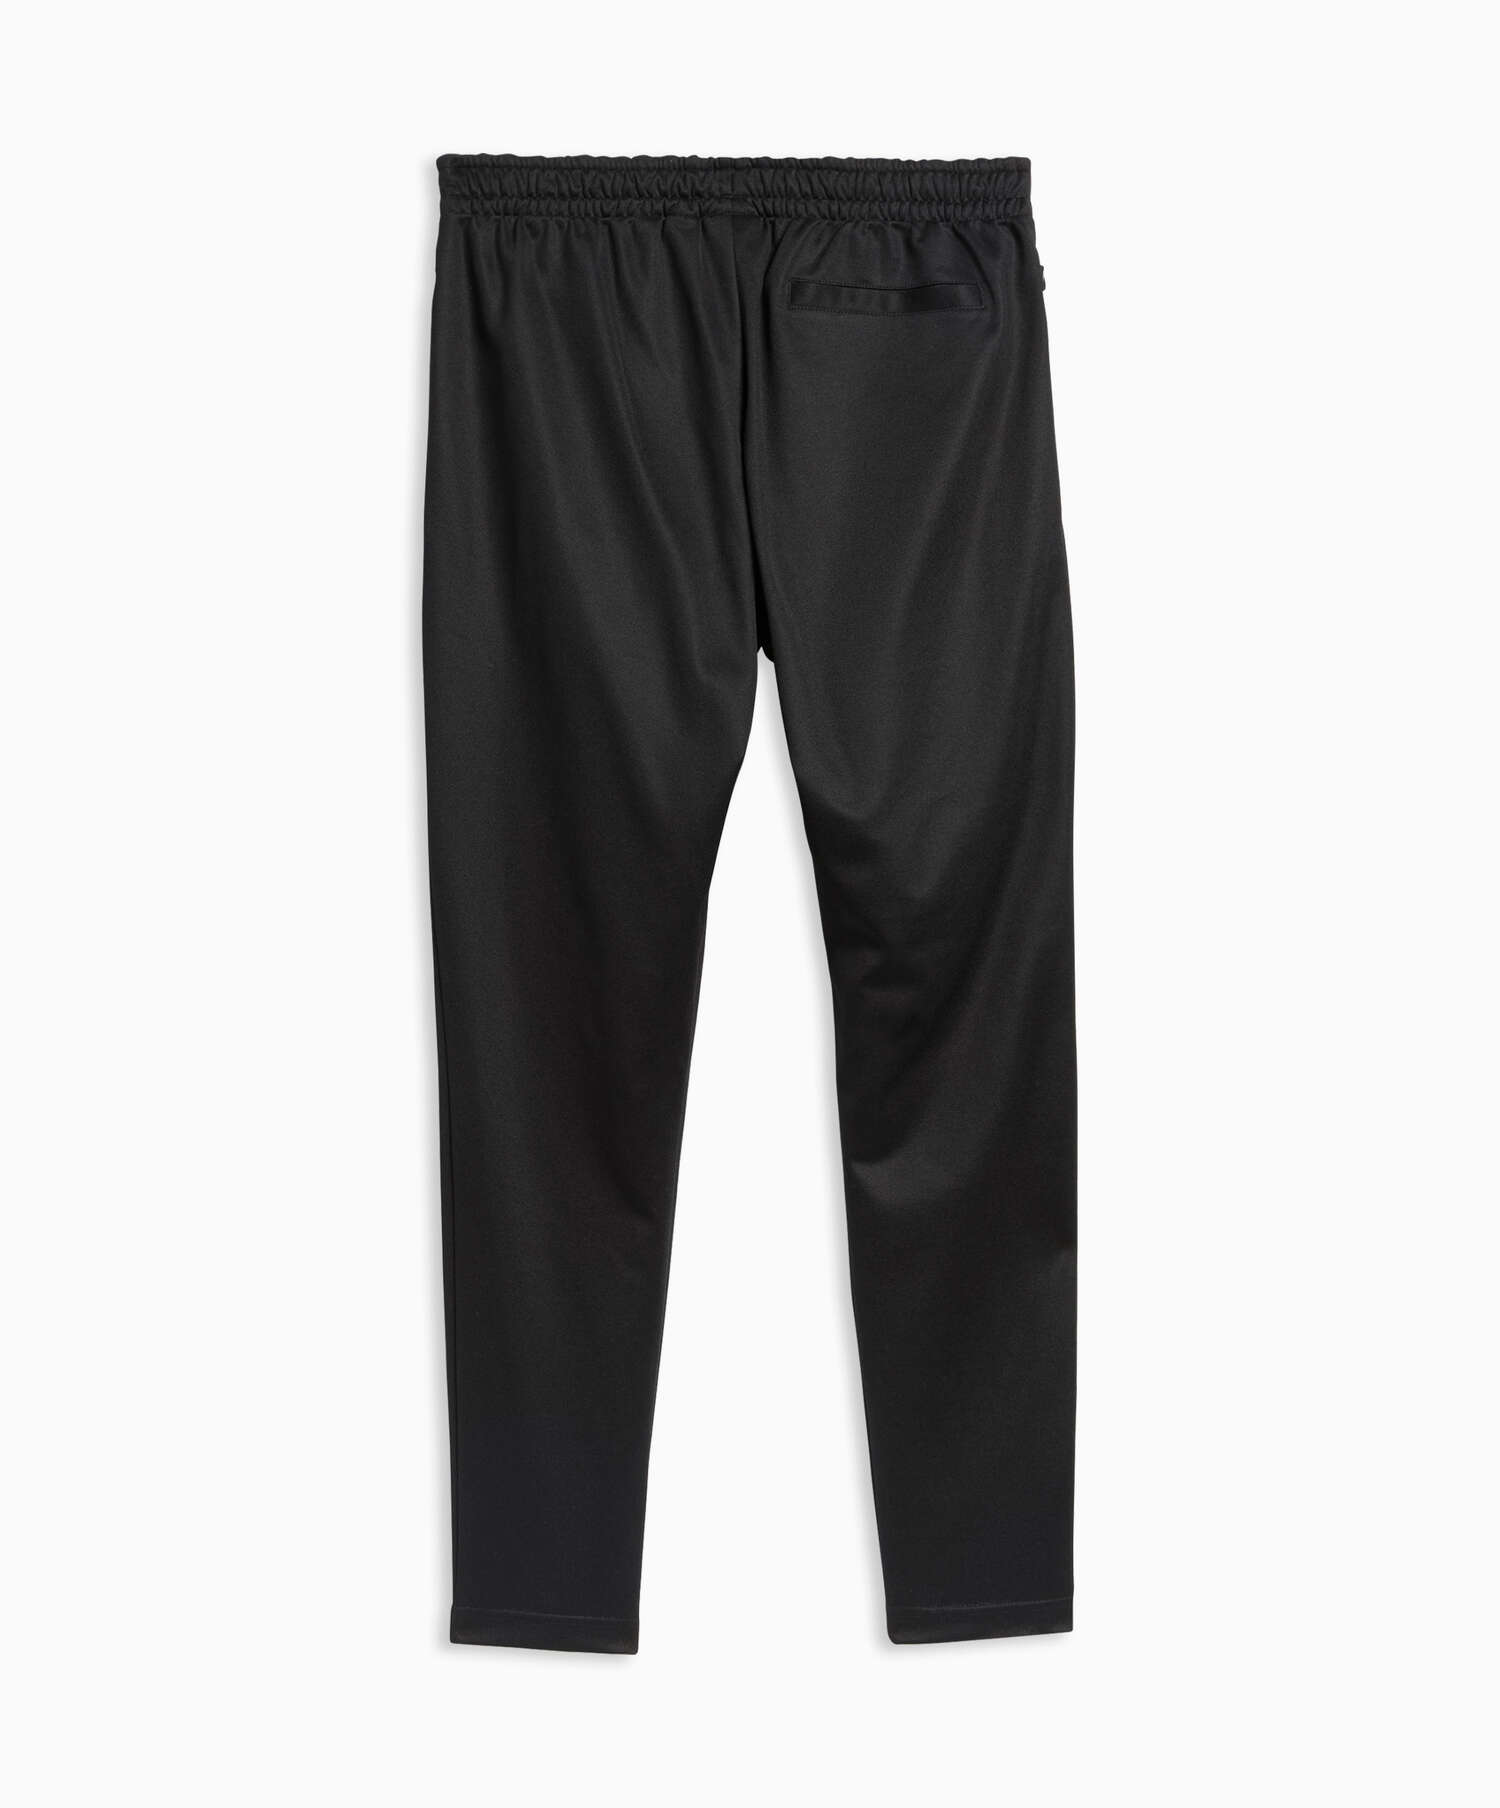 adidas x Ivy Park 4ALL Track Unisex Pants Multi GV1588| Buy Online at ...